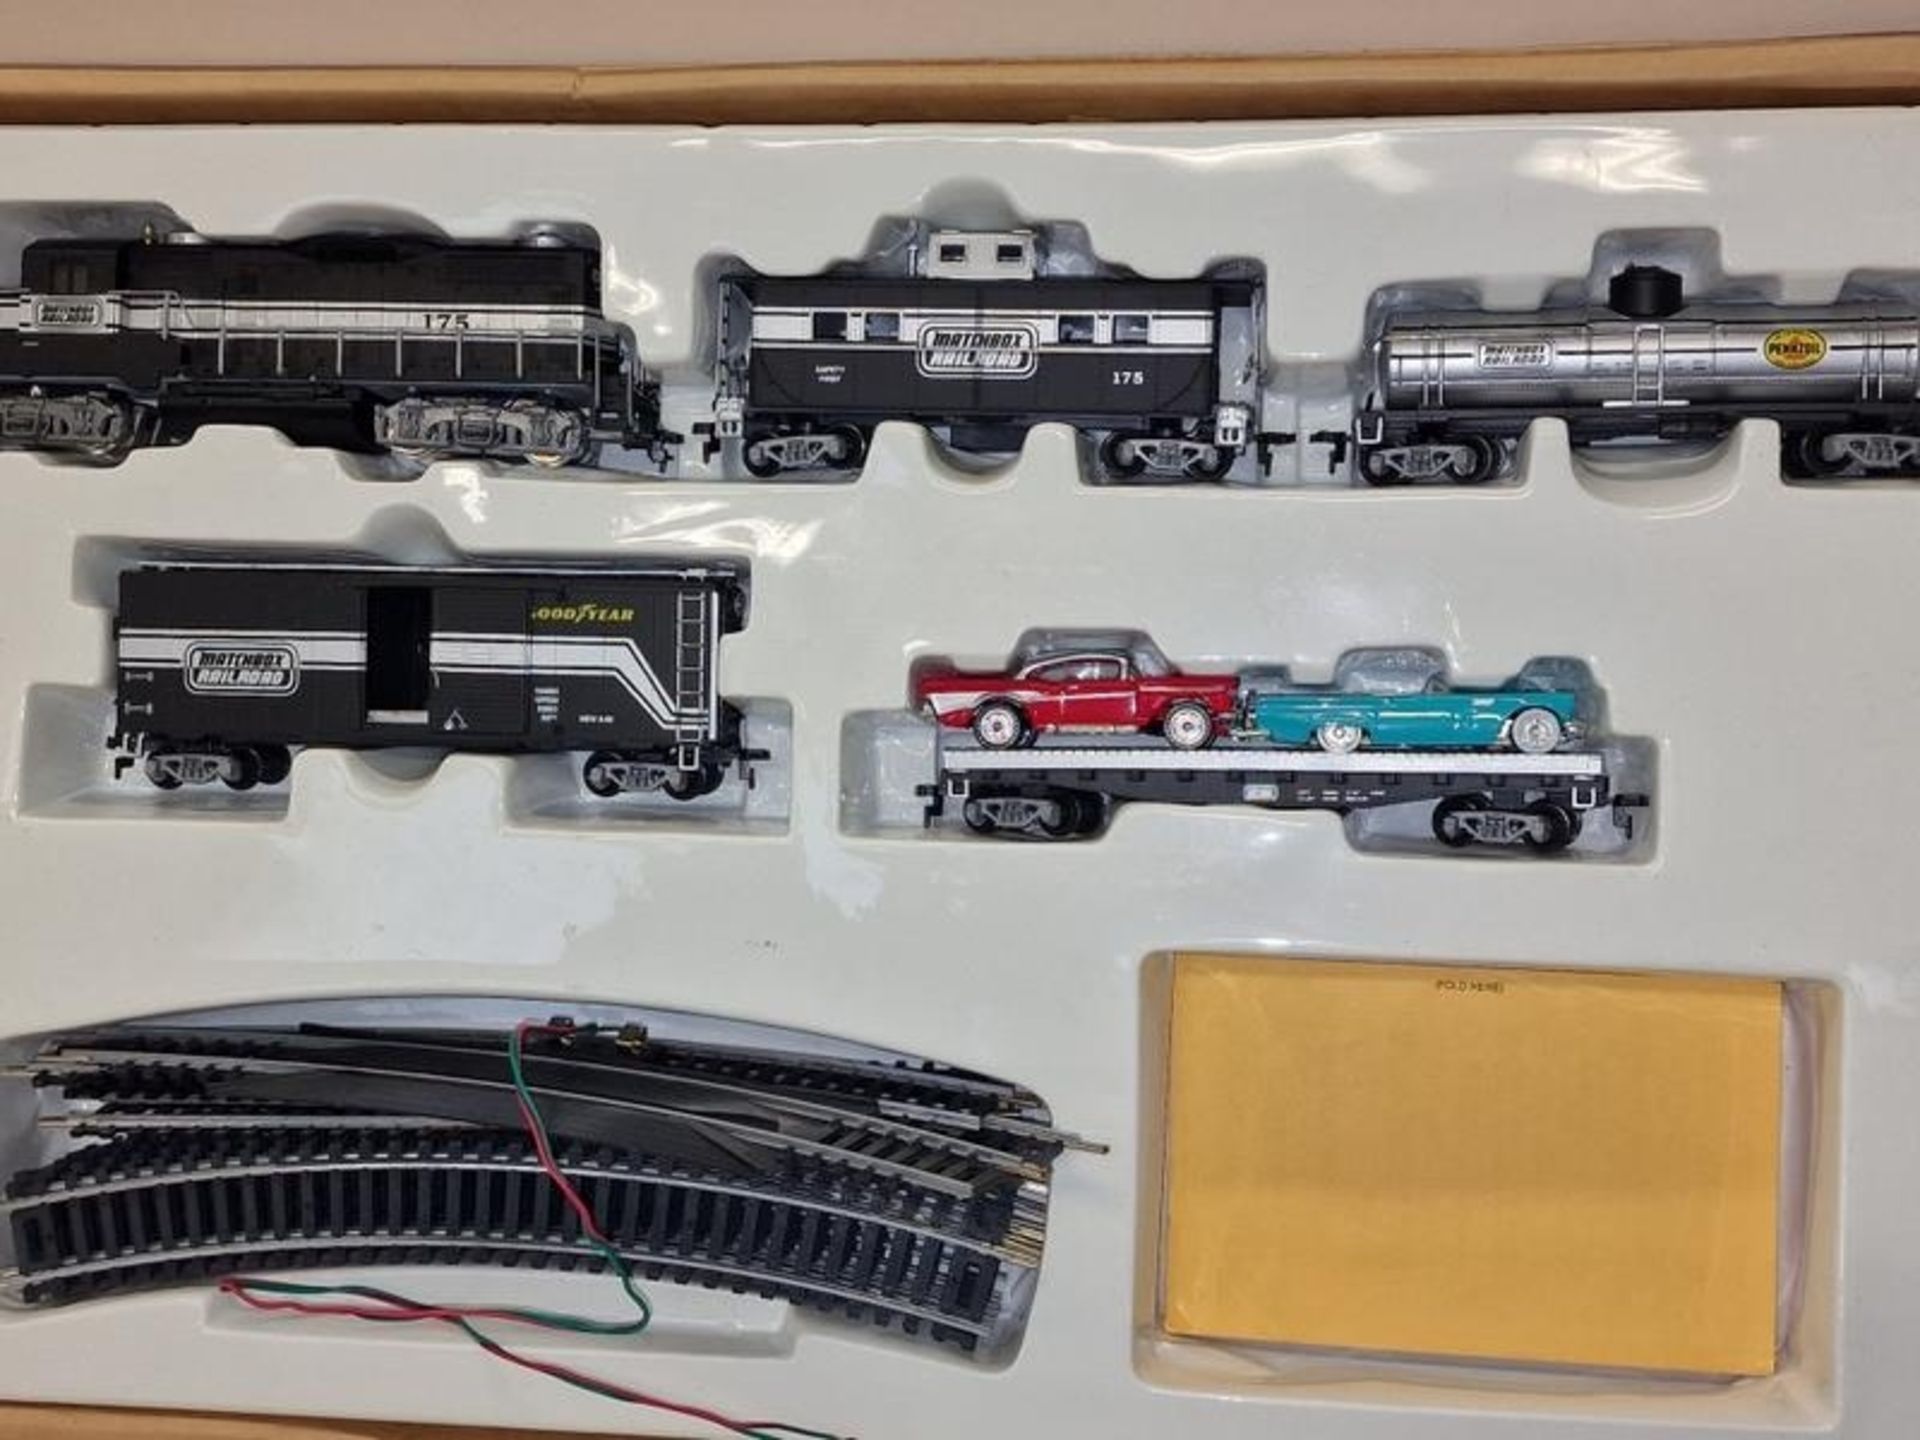 Matchbox Railroad HO Gauge electric train set in excellent condition with certificate. - Image 2 of 4